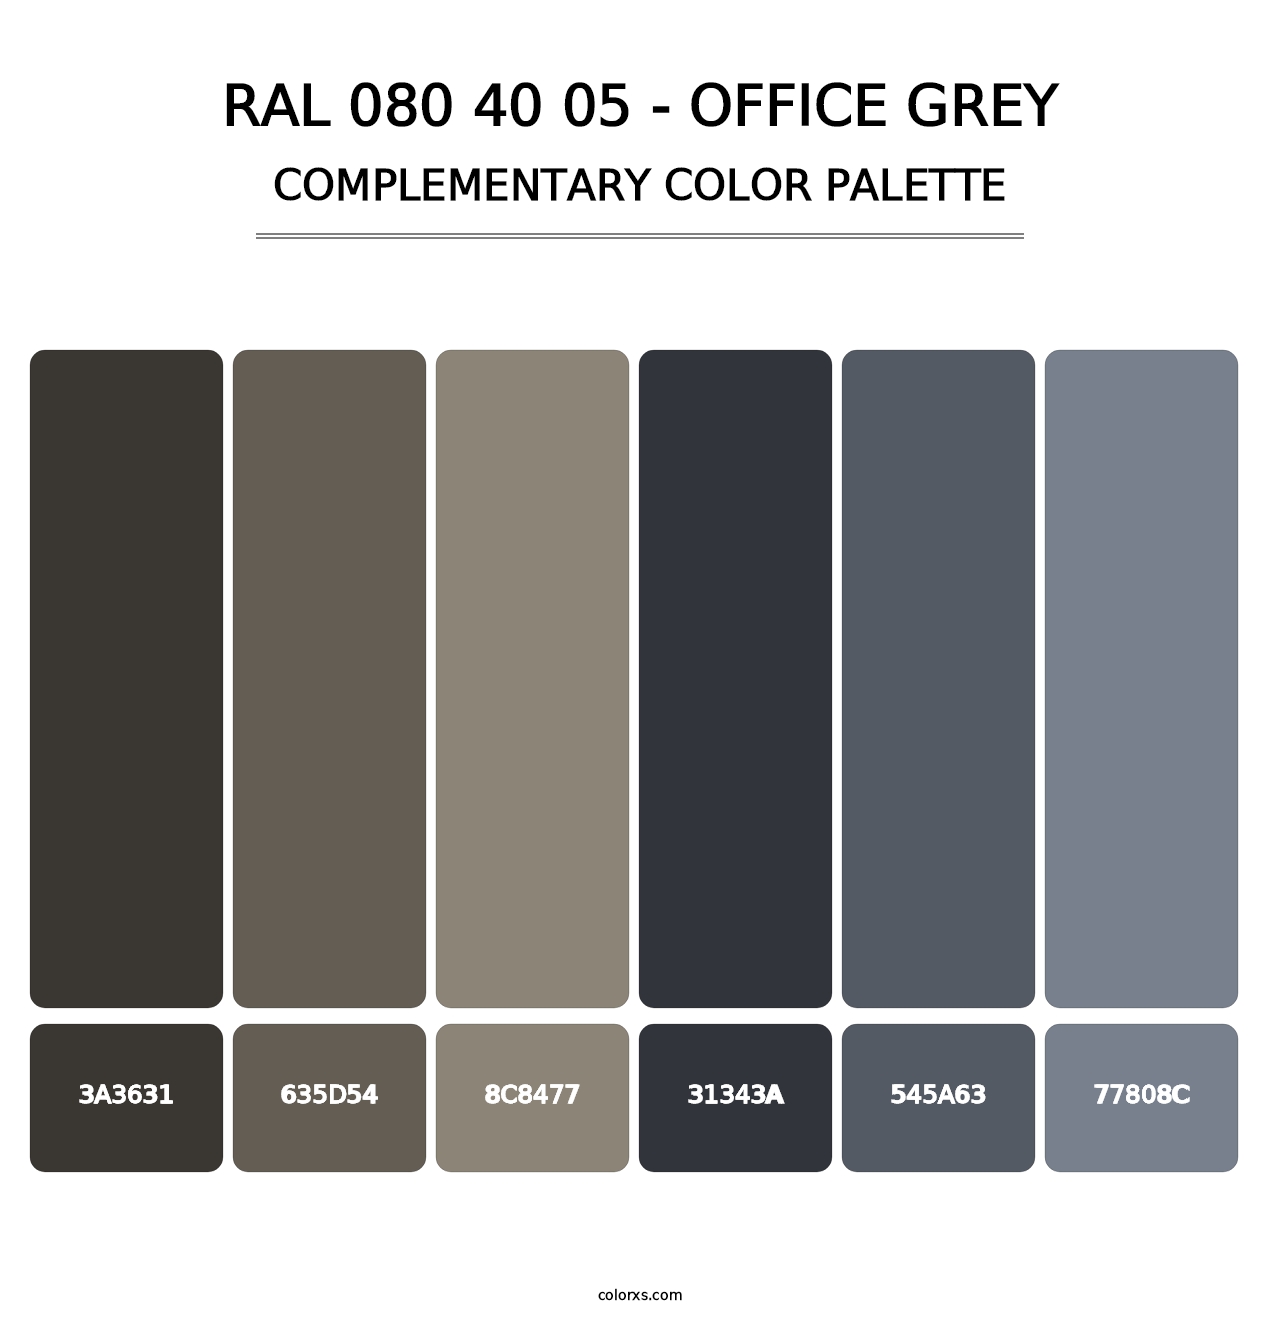 RAL 080 40 05 - Office Grey - Complementary Color Palette